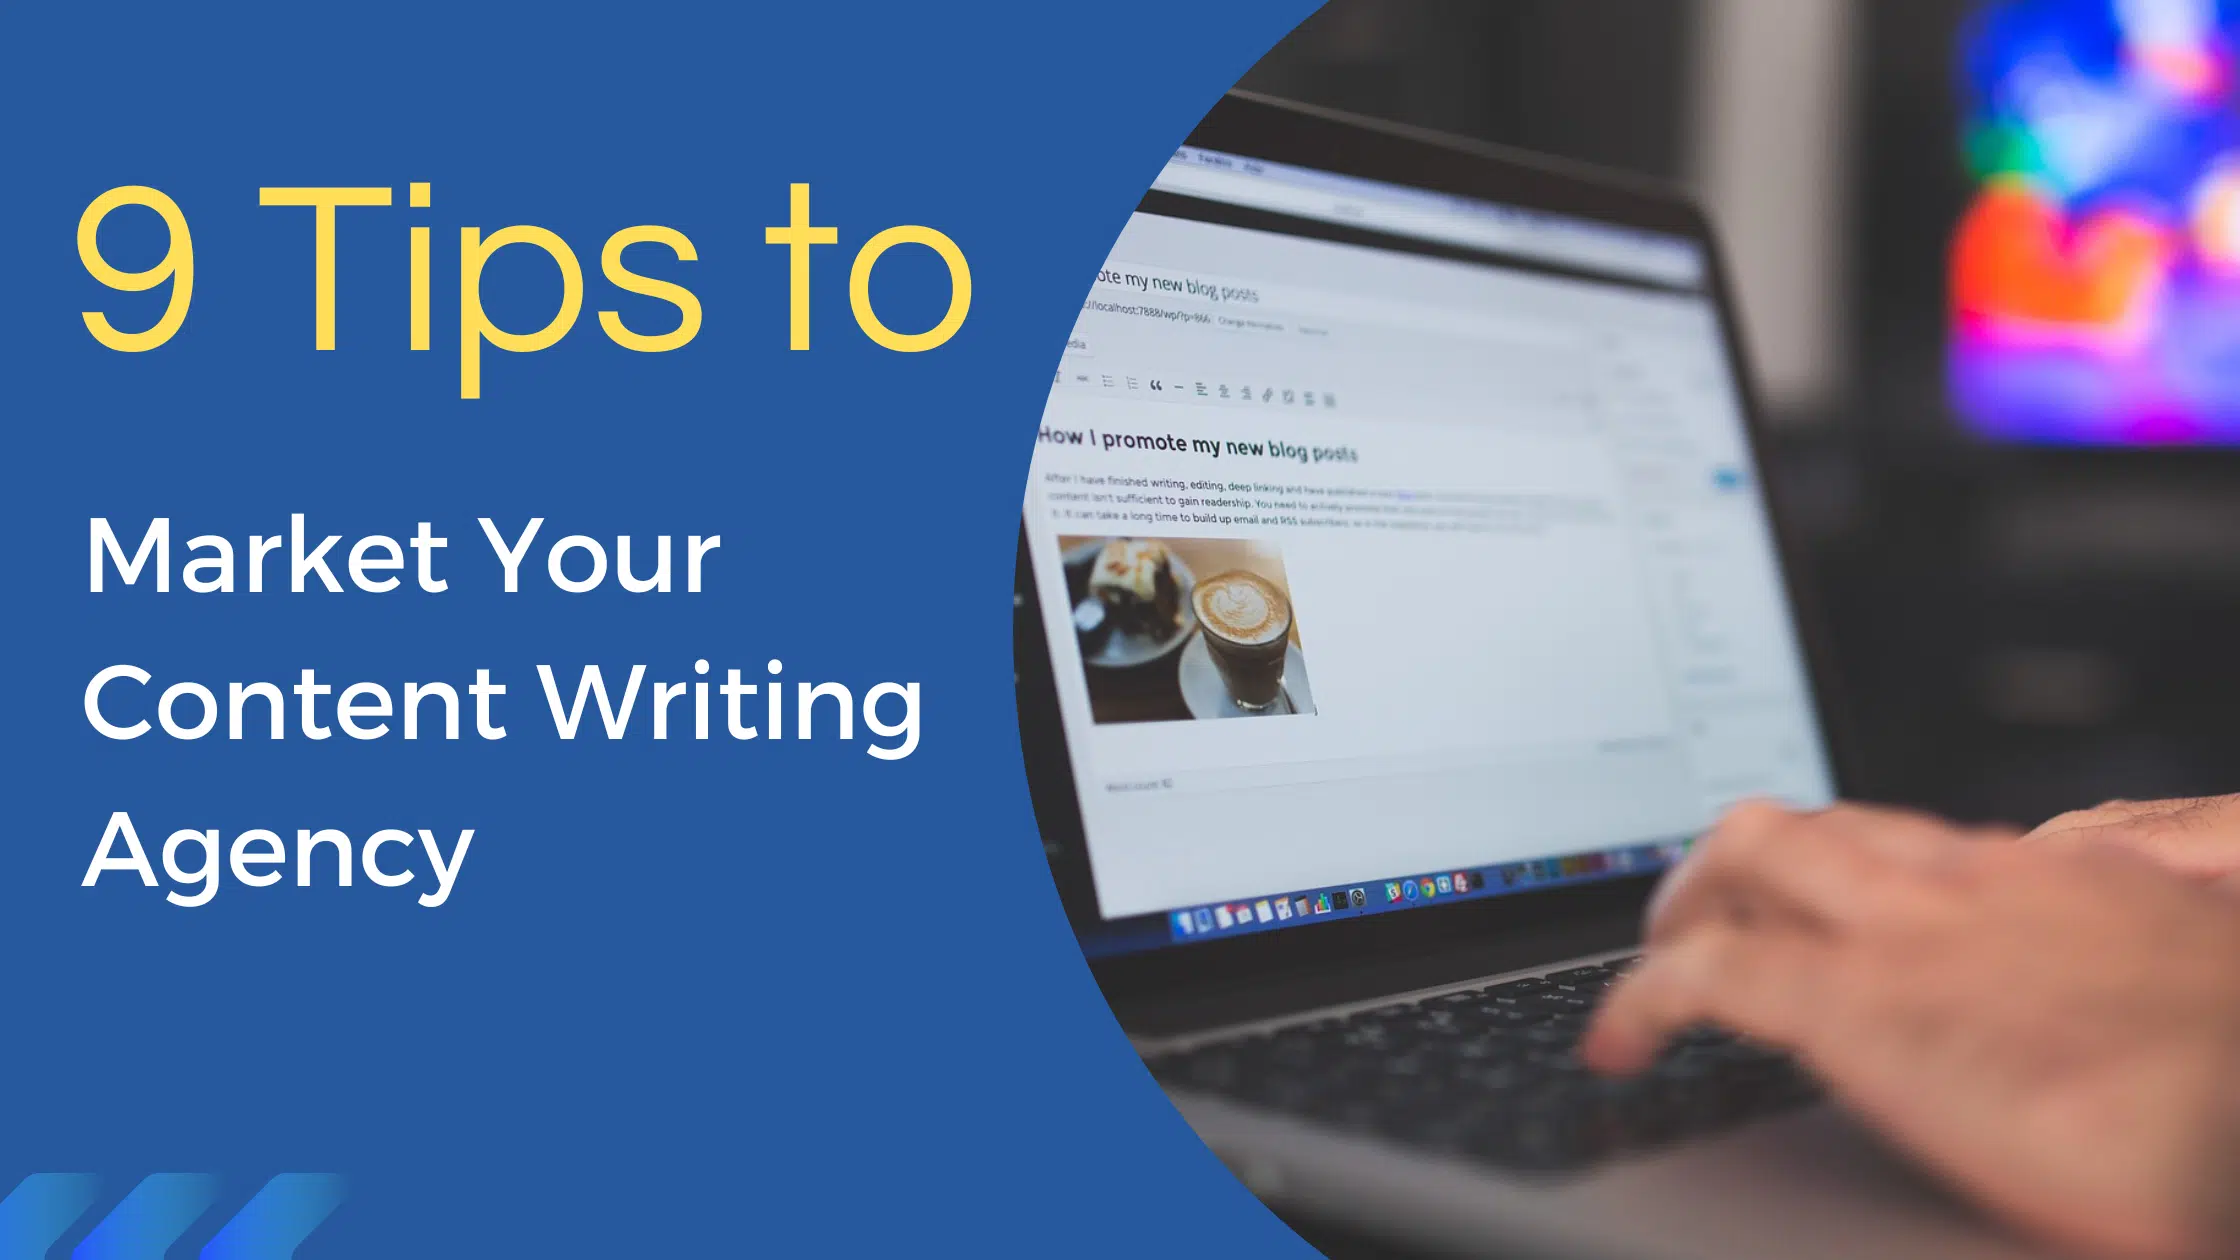 9 Tips to Market Your Content Writing Agency